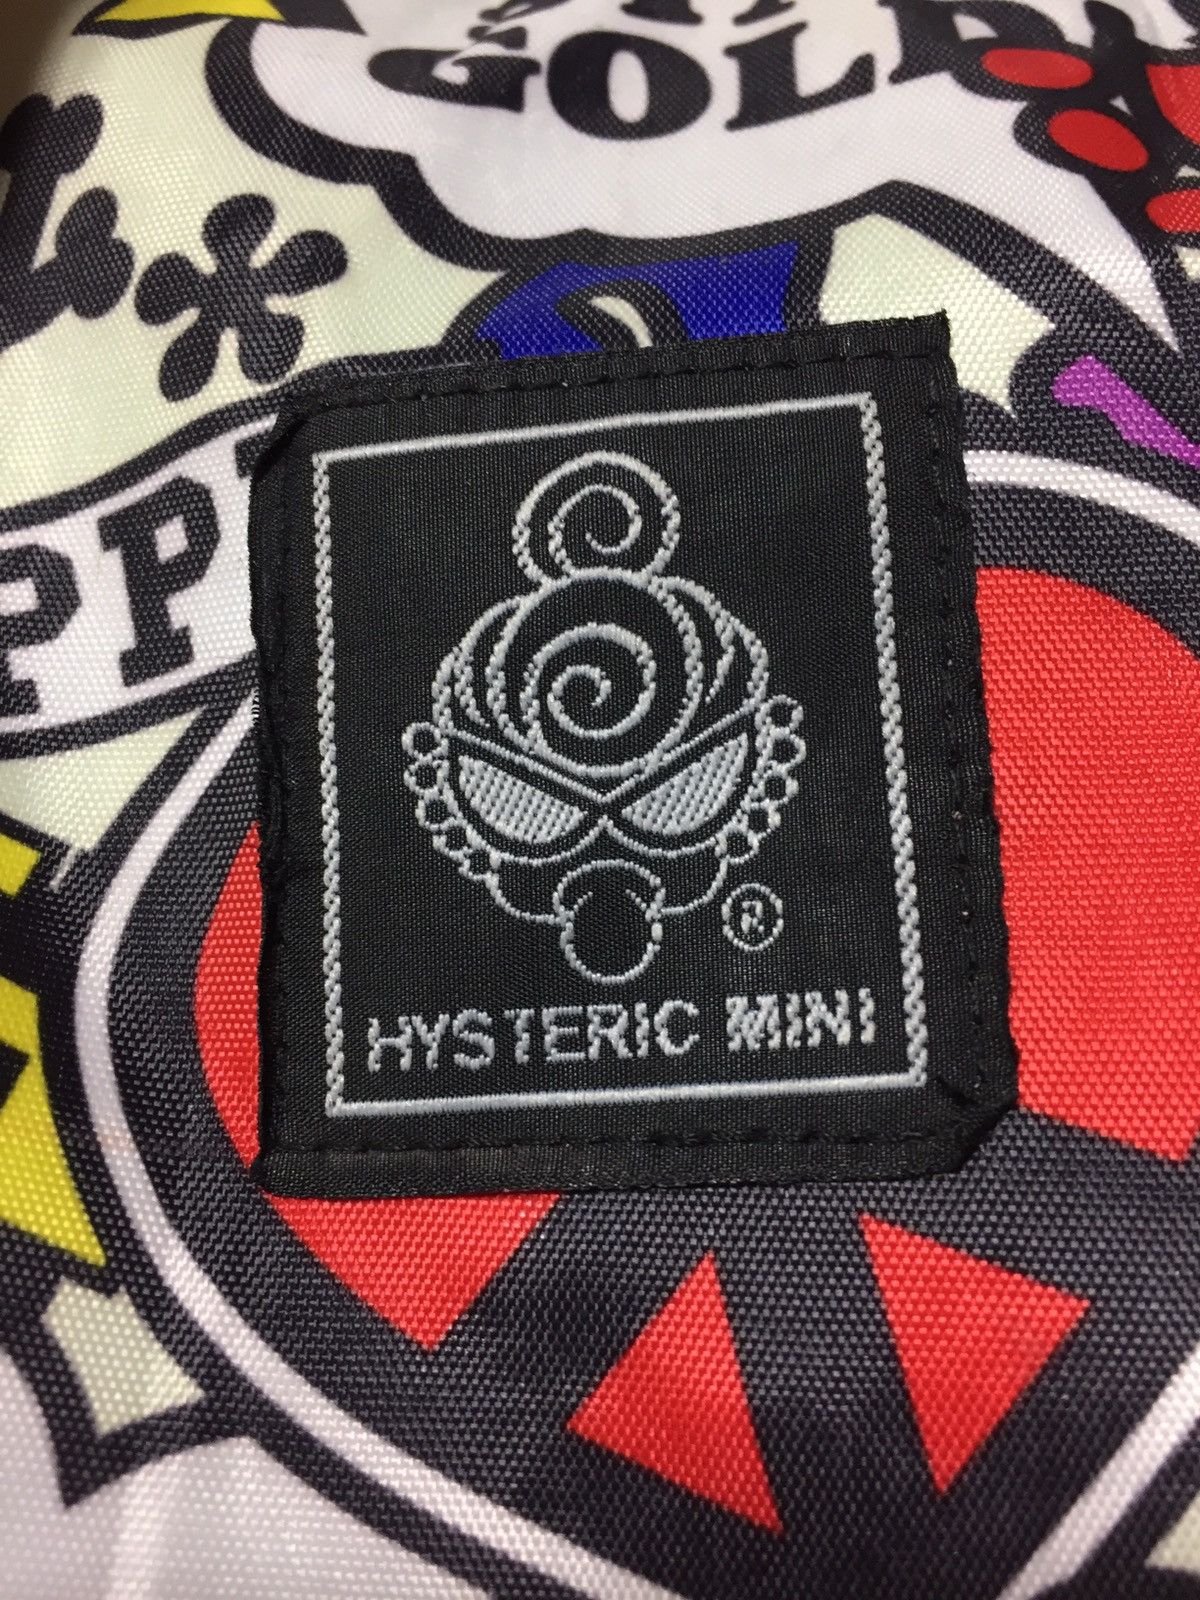 Hysteric Mini By Hysteric Glamour Bagpack - 5